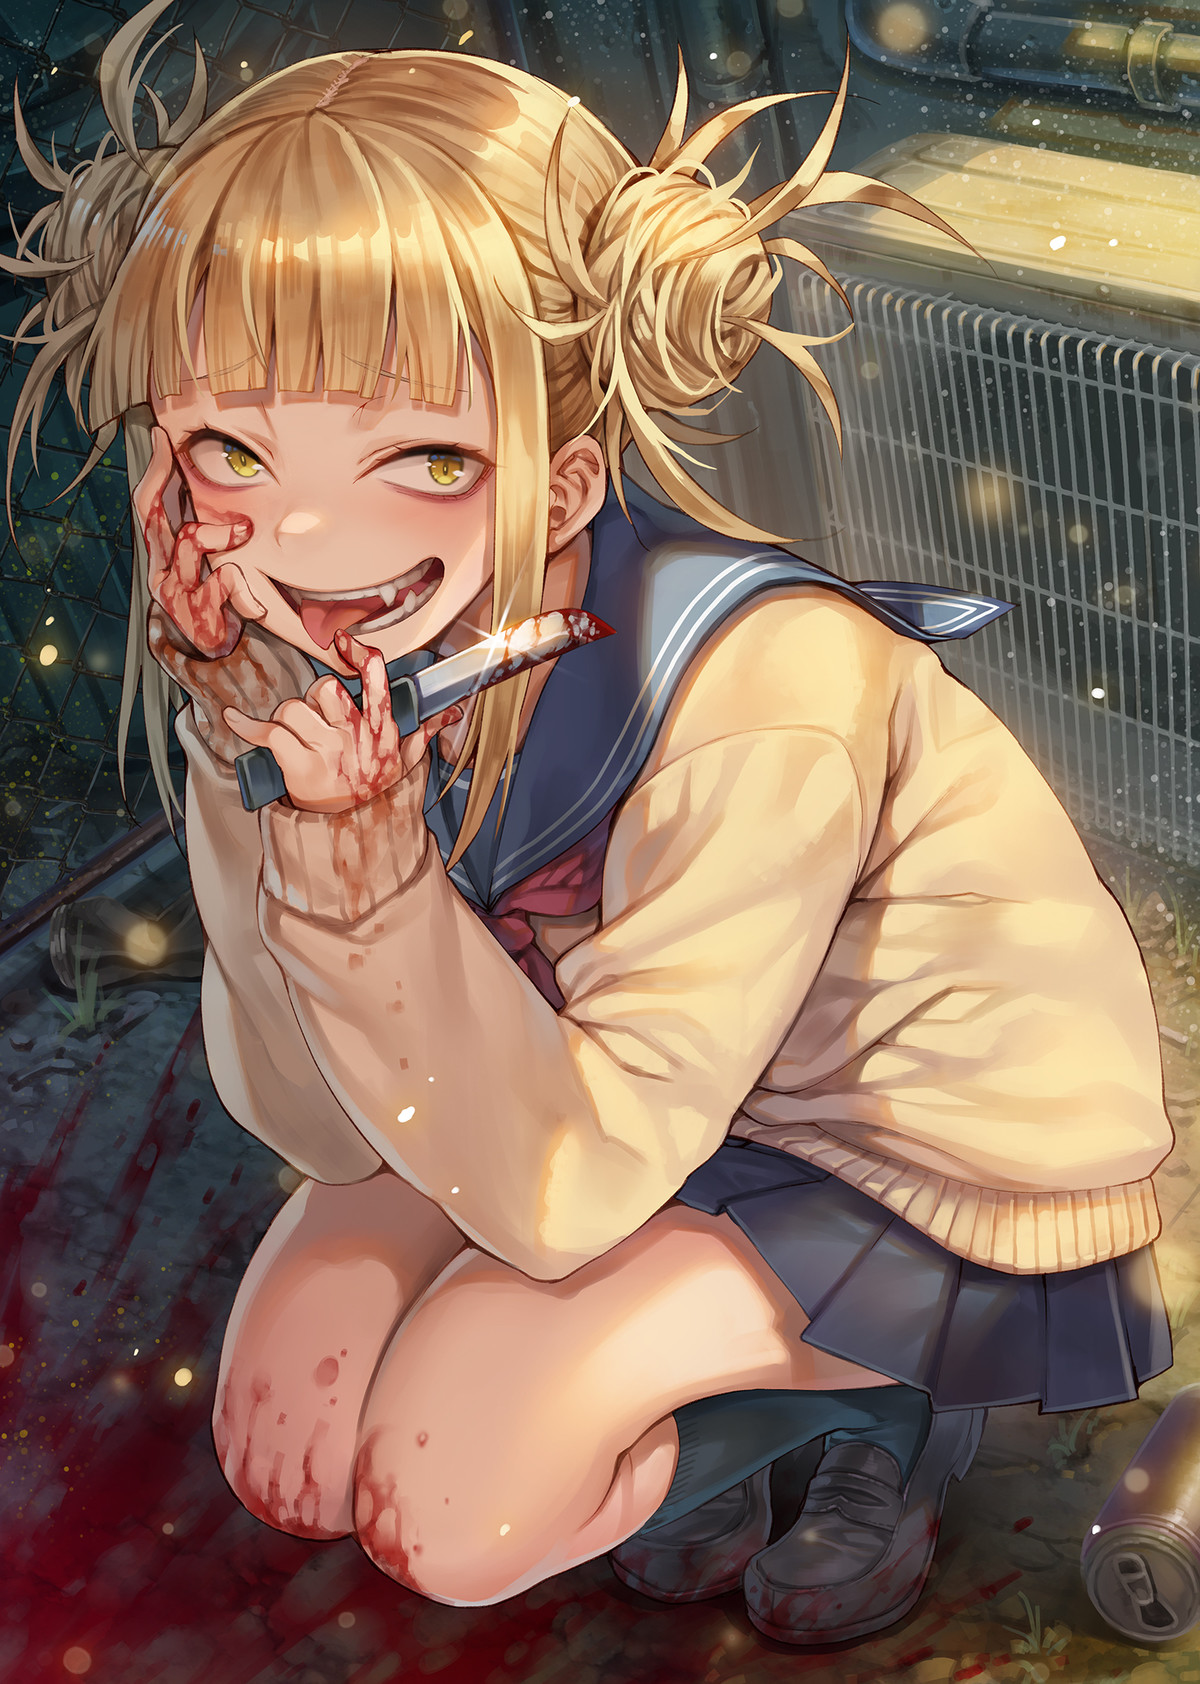 Daily Toga - 902: Messy Eater. join list: DailyToga (477 subs)Mention History Source: .. Damn, y’all rare steak eaters are wild.